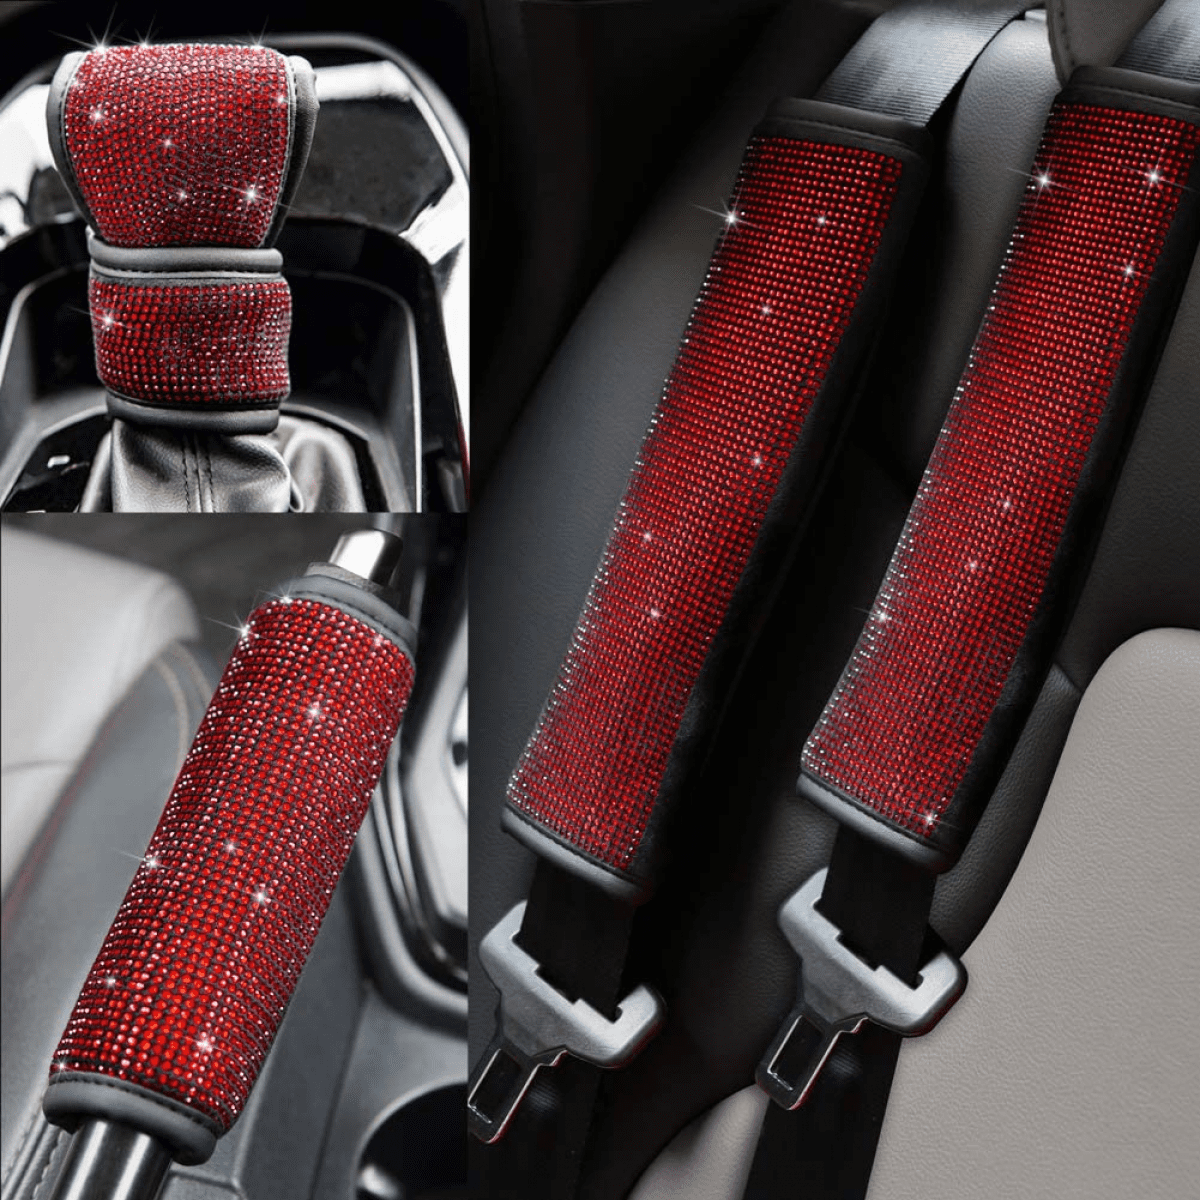 Bling Car Accessories for Women Interior Set-6 Pack Diamond Car Accessories with 2 Bling Seat Belt Covers,2 Bling Car Hook Backseat,Bling Gear Shift Cover Handbrake Cover 6 Pack 